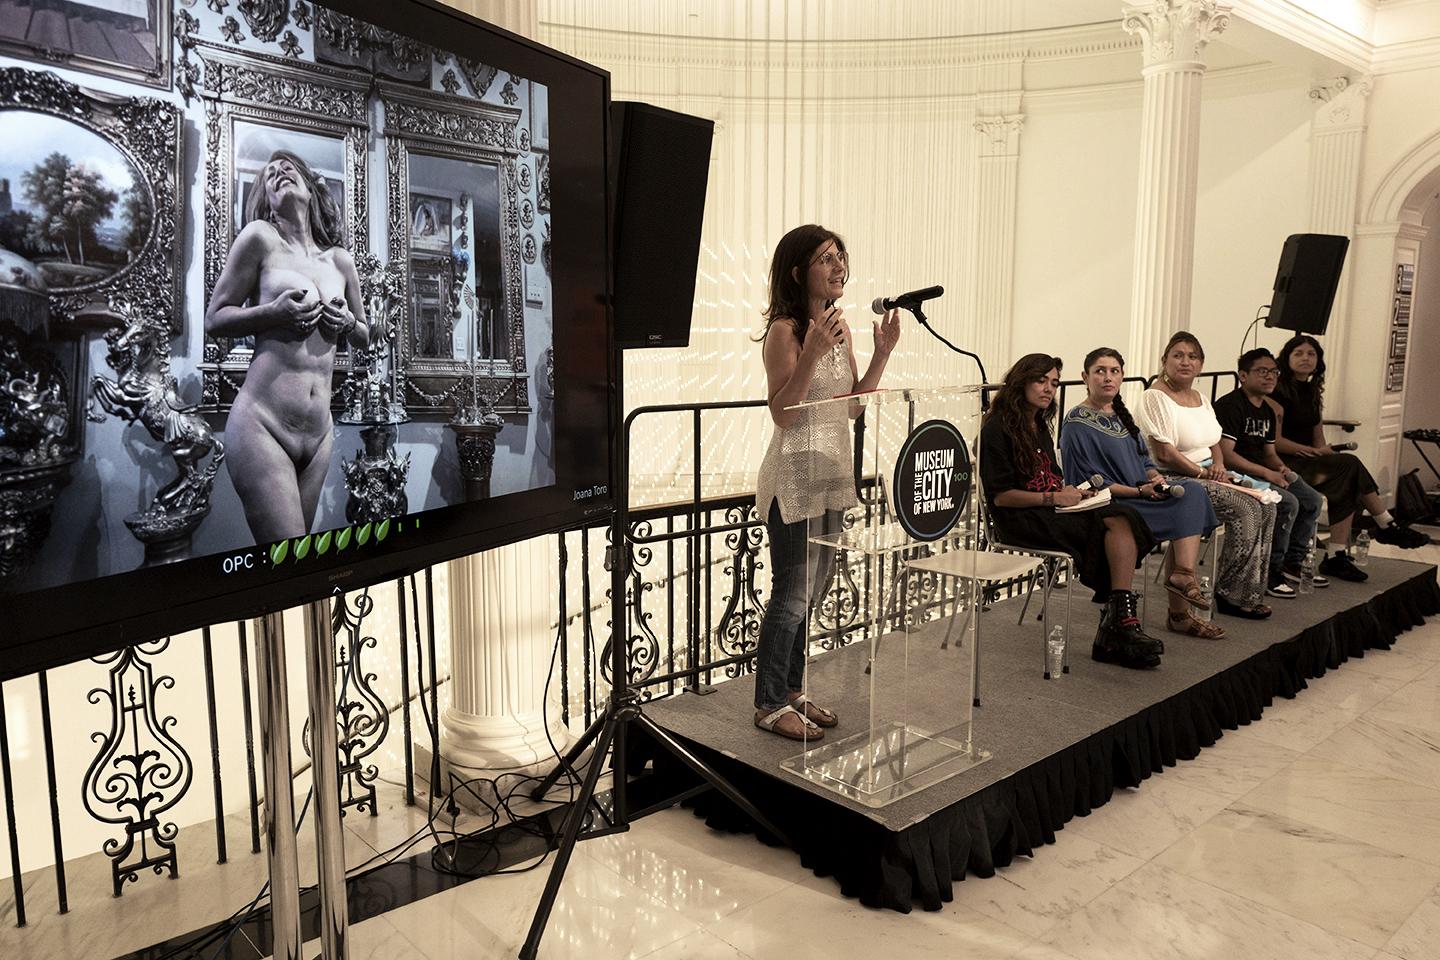  Artist talk at Museum of the city of New York